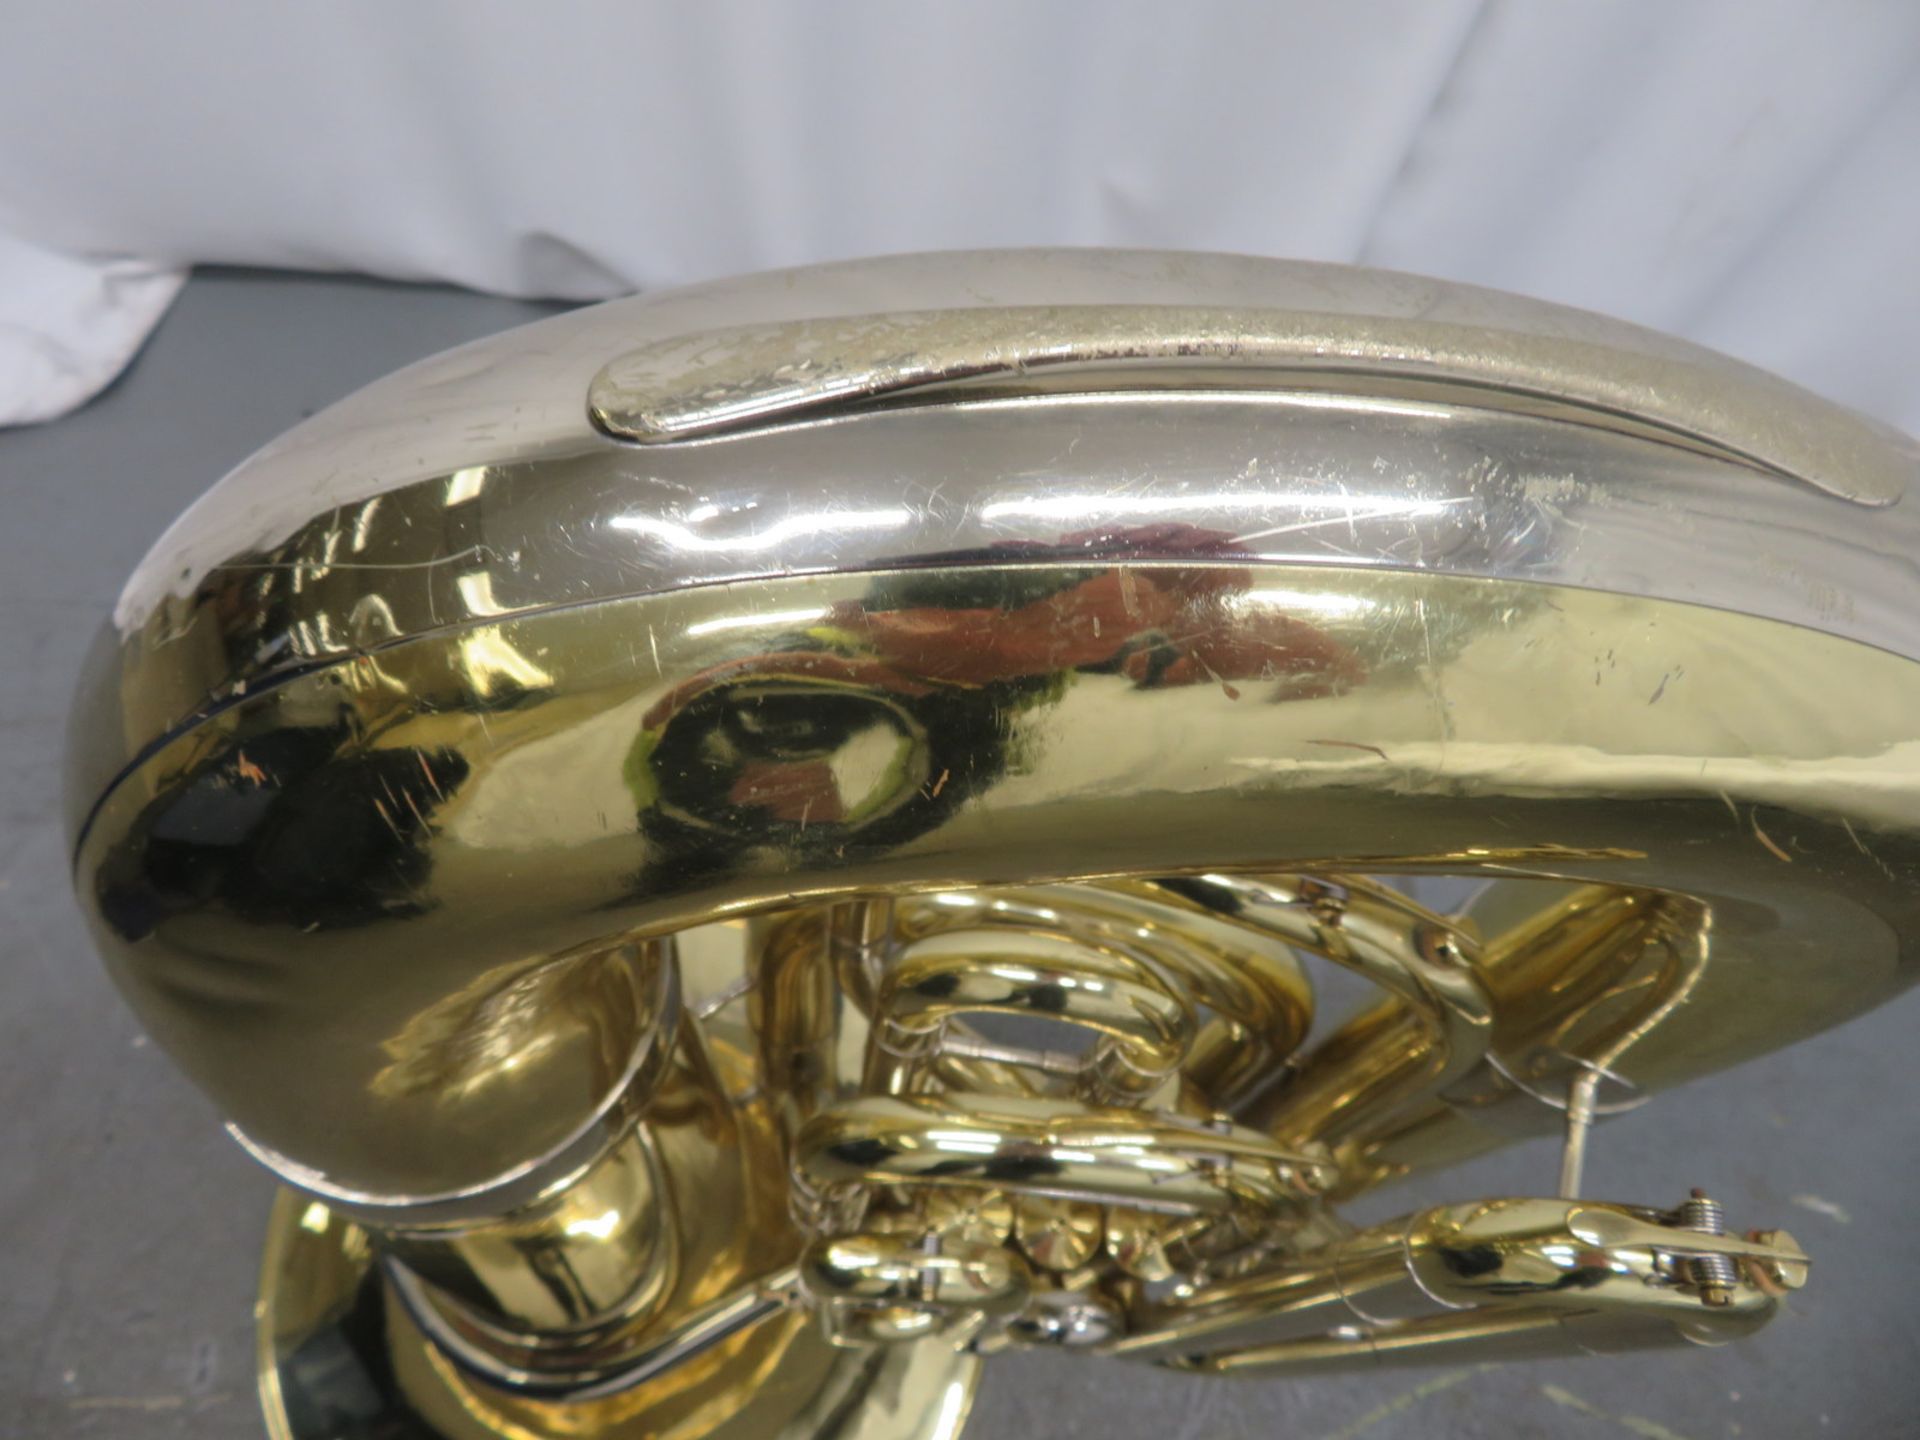 Miraphone Eeb 1261 tuba with case. Serial number: 9031538. - Image 6 of 18